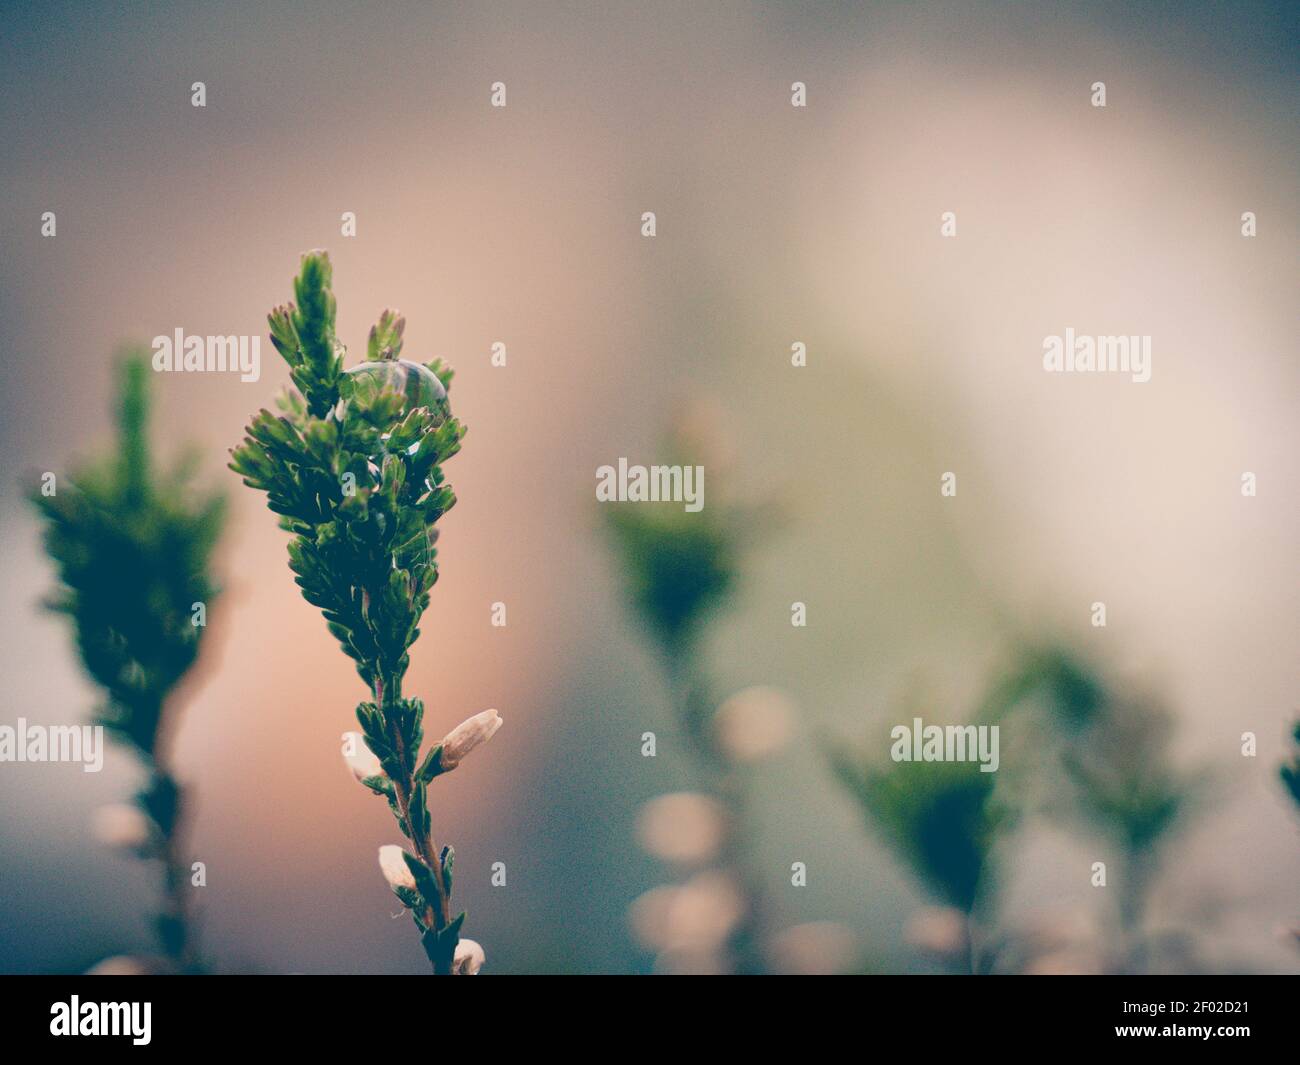 Floral spring abstract concept background. Blossoming heather with rain drop closeup with text space Stock Photo